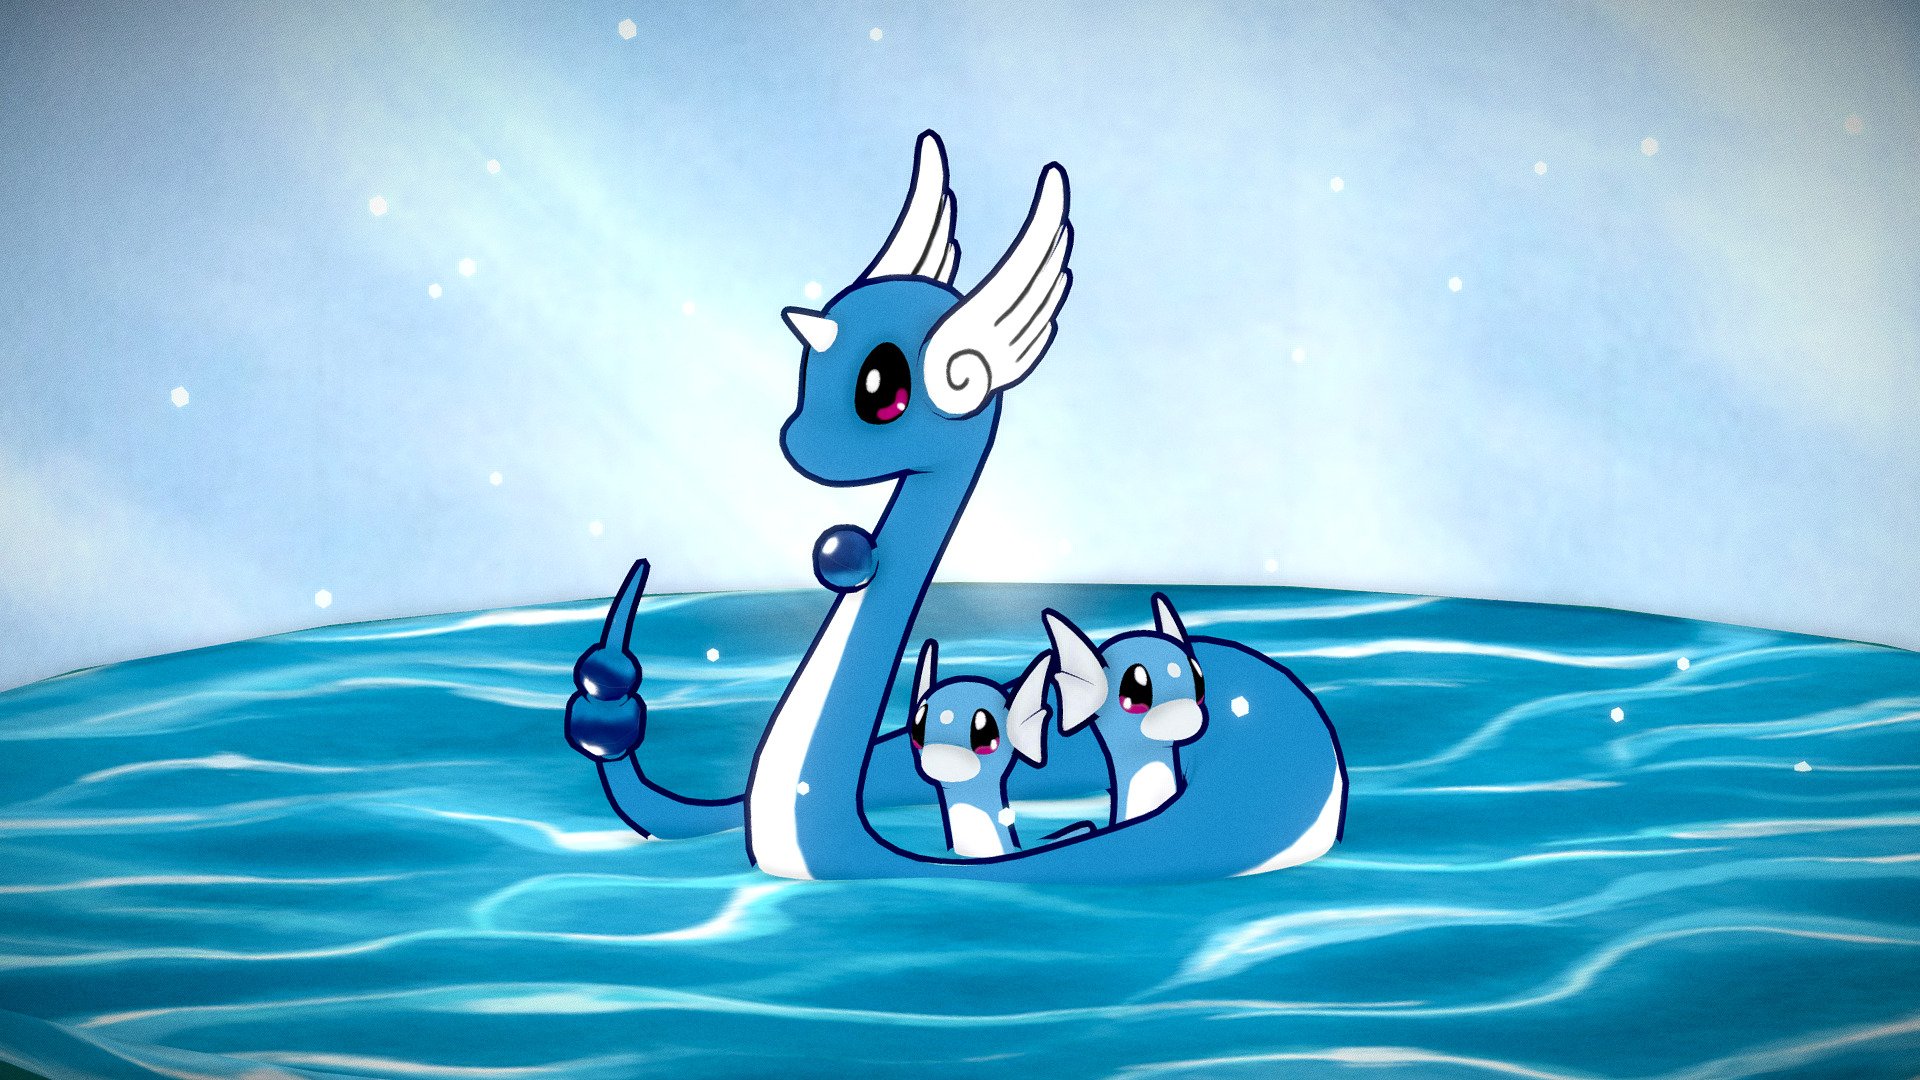 3D model of Dragonair with Dratini twins, the first dragon Pokemon. The model has simple handpainted textures and it is cellshaded 3d model